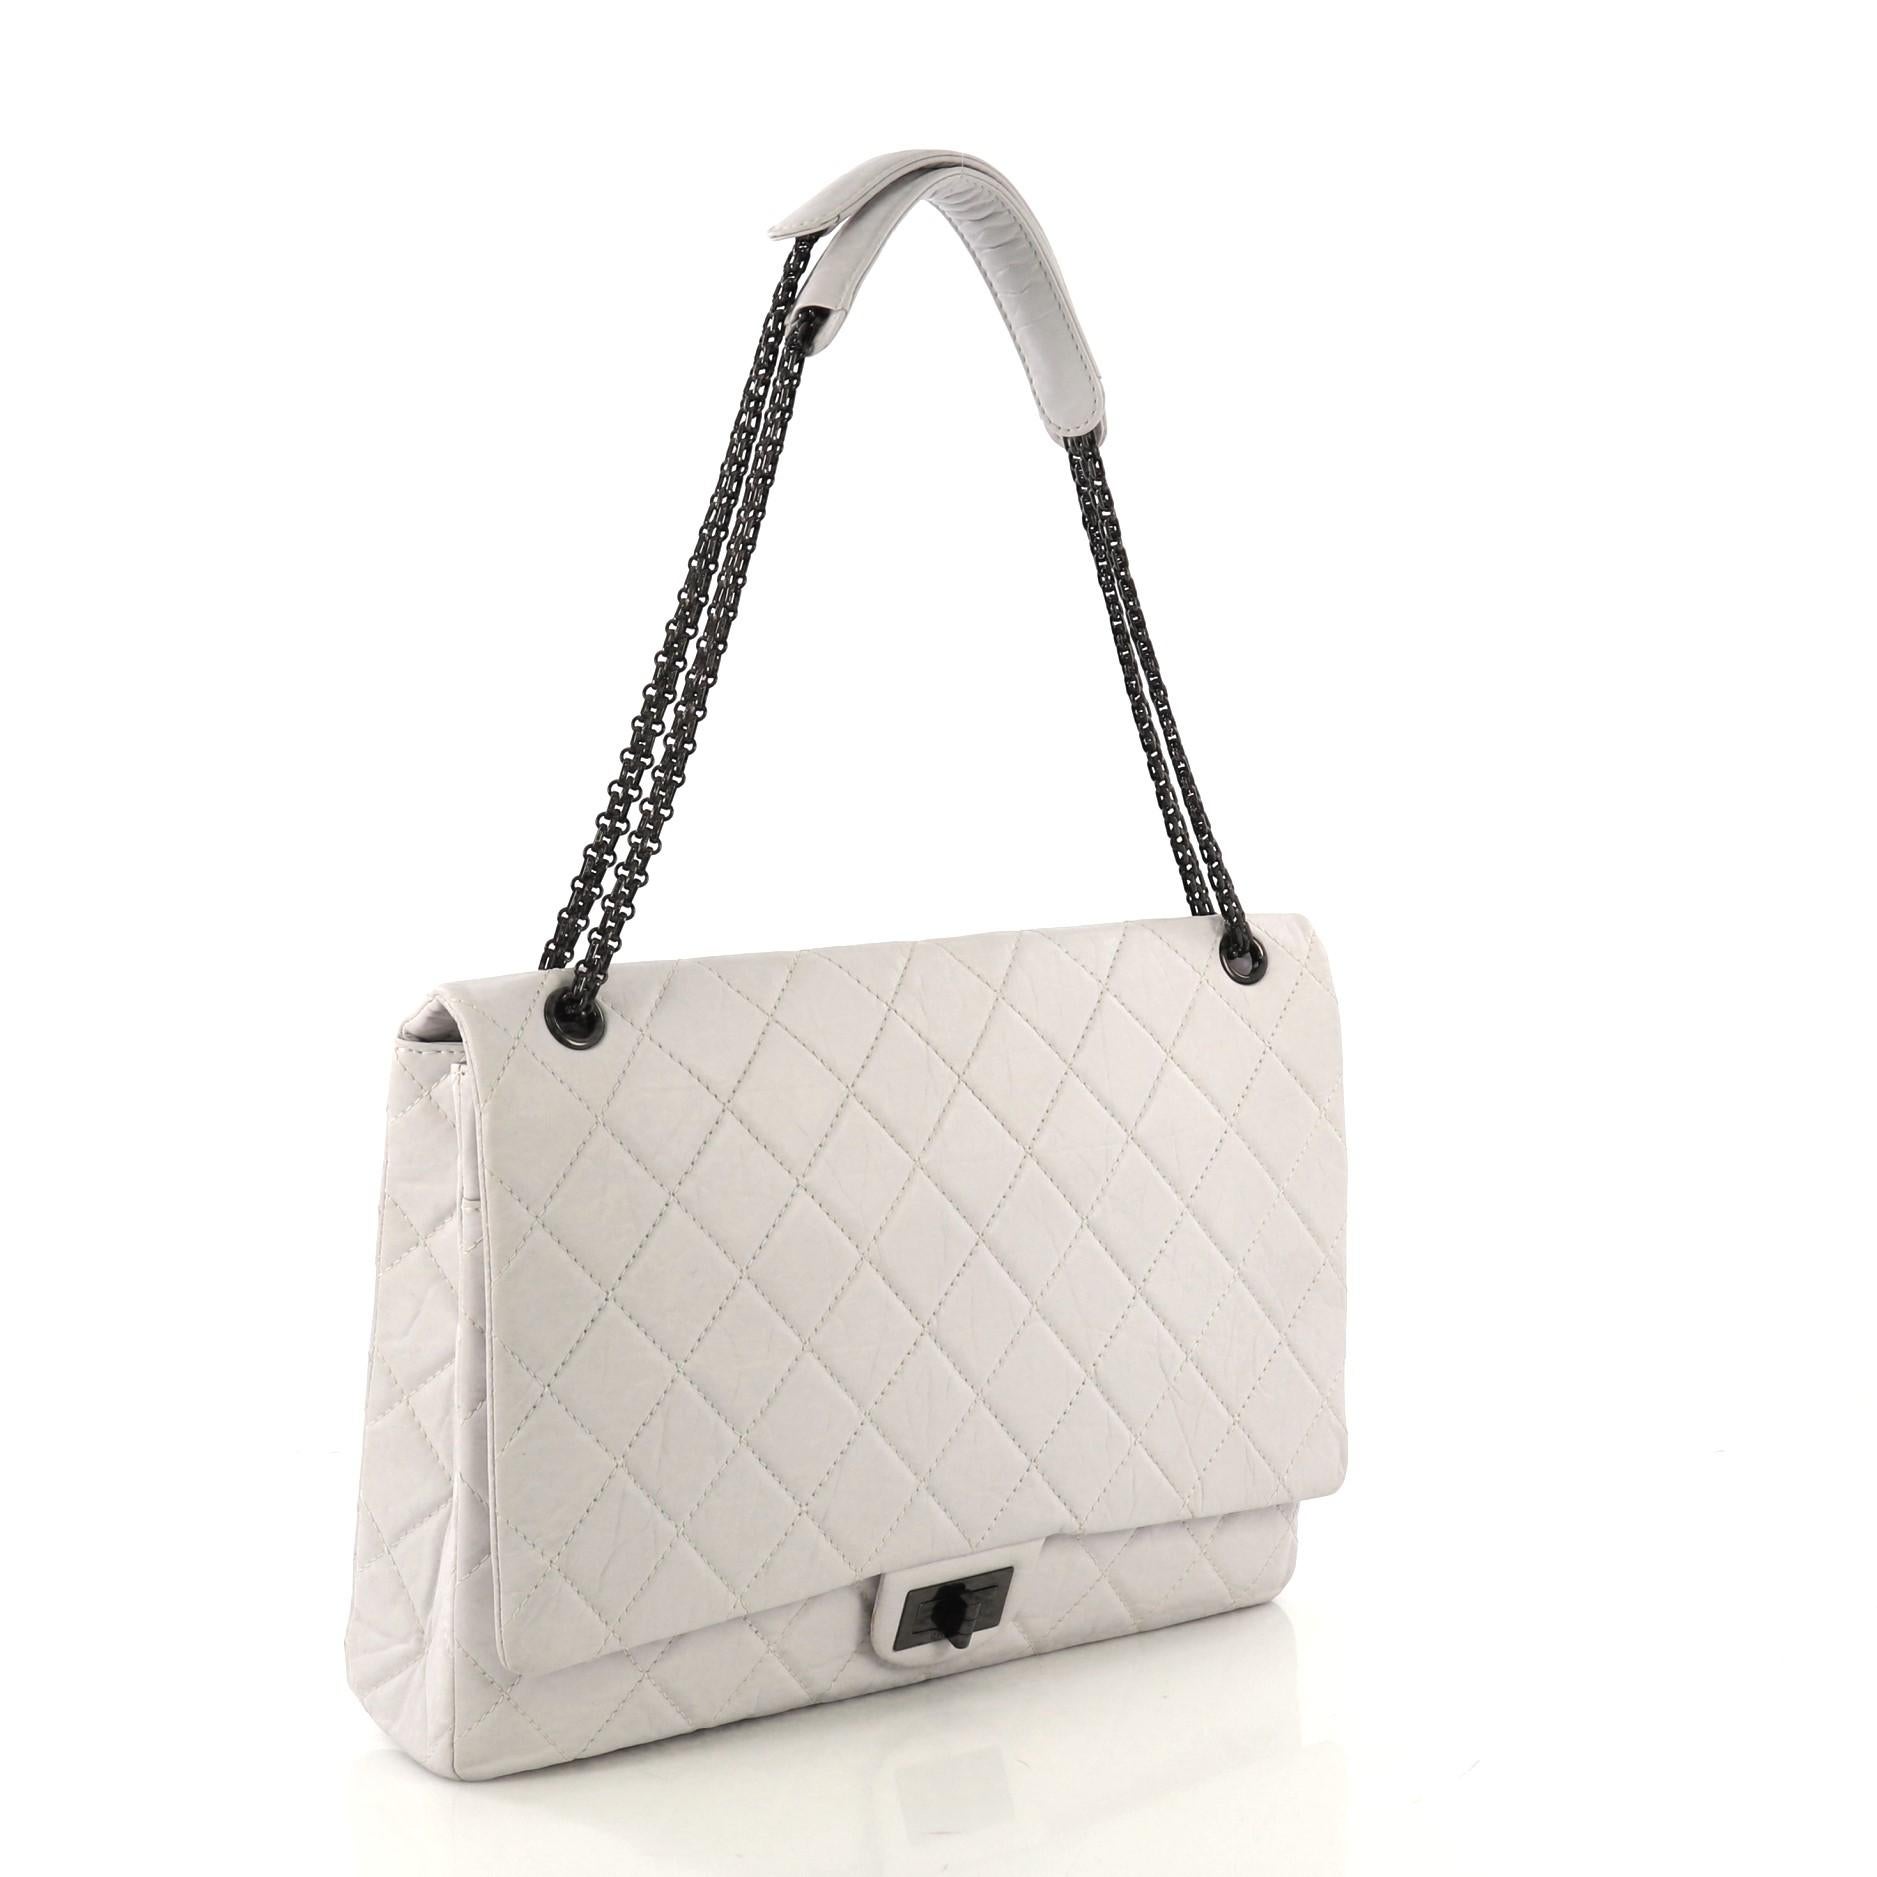 This Chanel Reissue 2.55 Flap Bag Quilted Aged Calfskin XL, crafted from pale gray quilted aged calfskin leather, features reissue chain link strap, exterior back slip pocket, and black-tone hardware. Its mademoiselle turn-lock closure opens to a